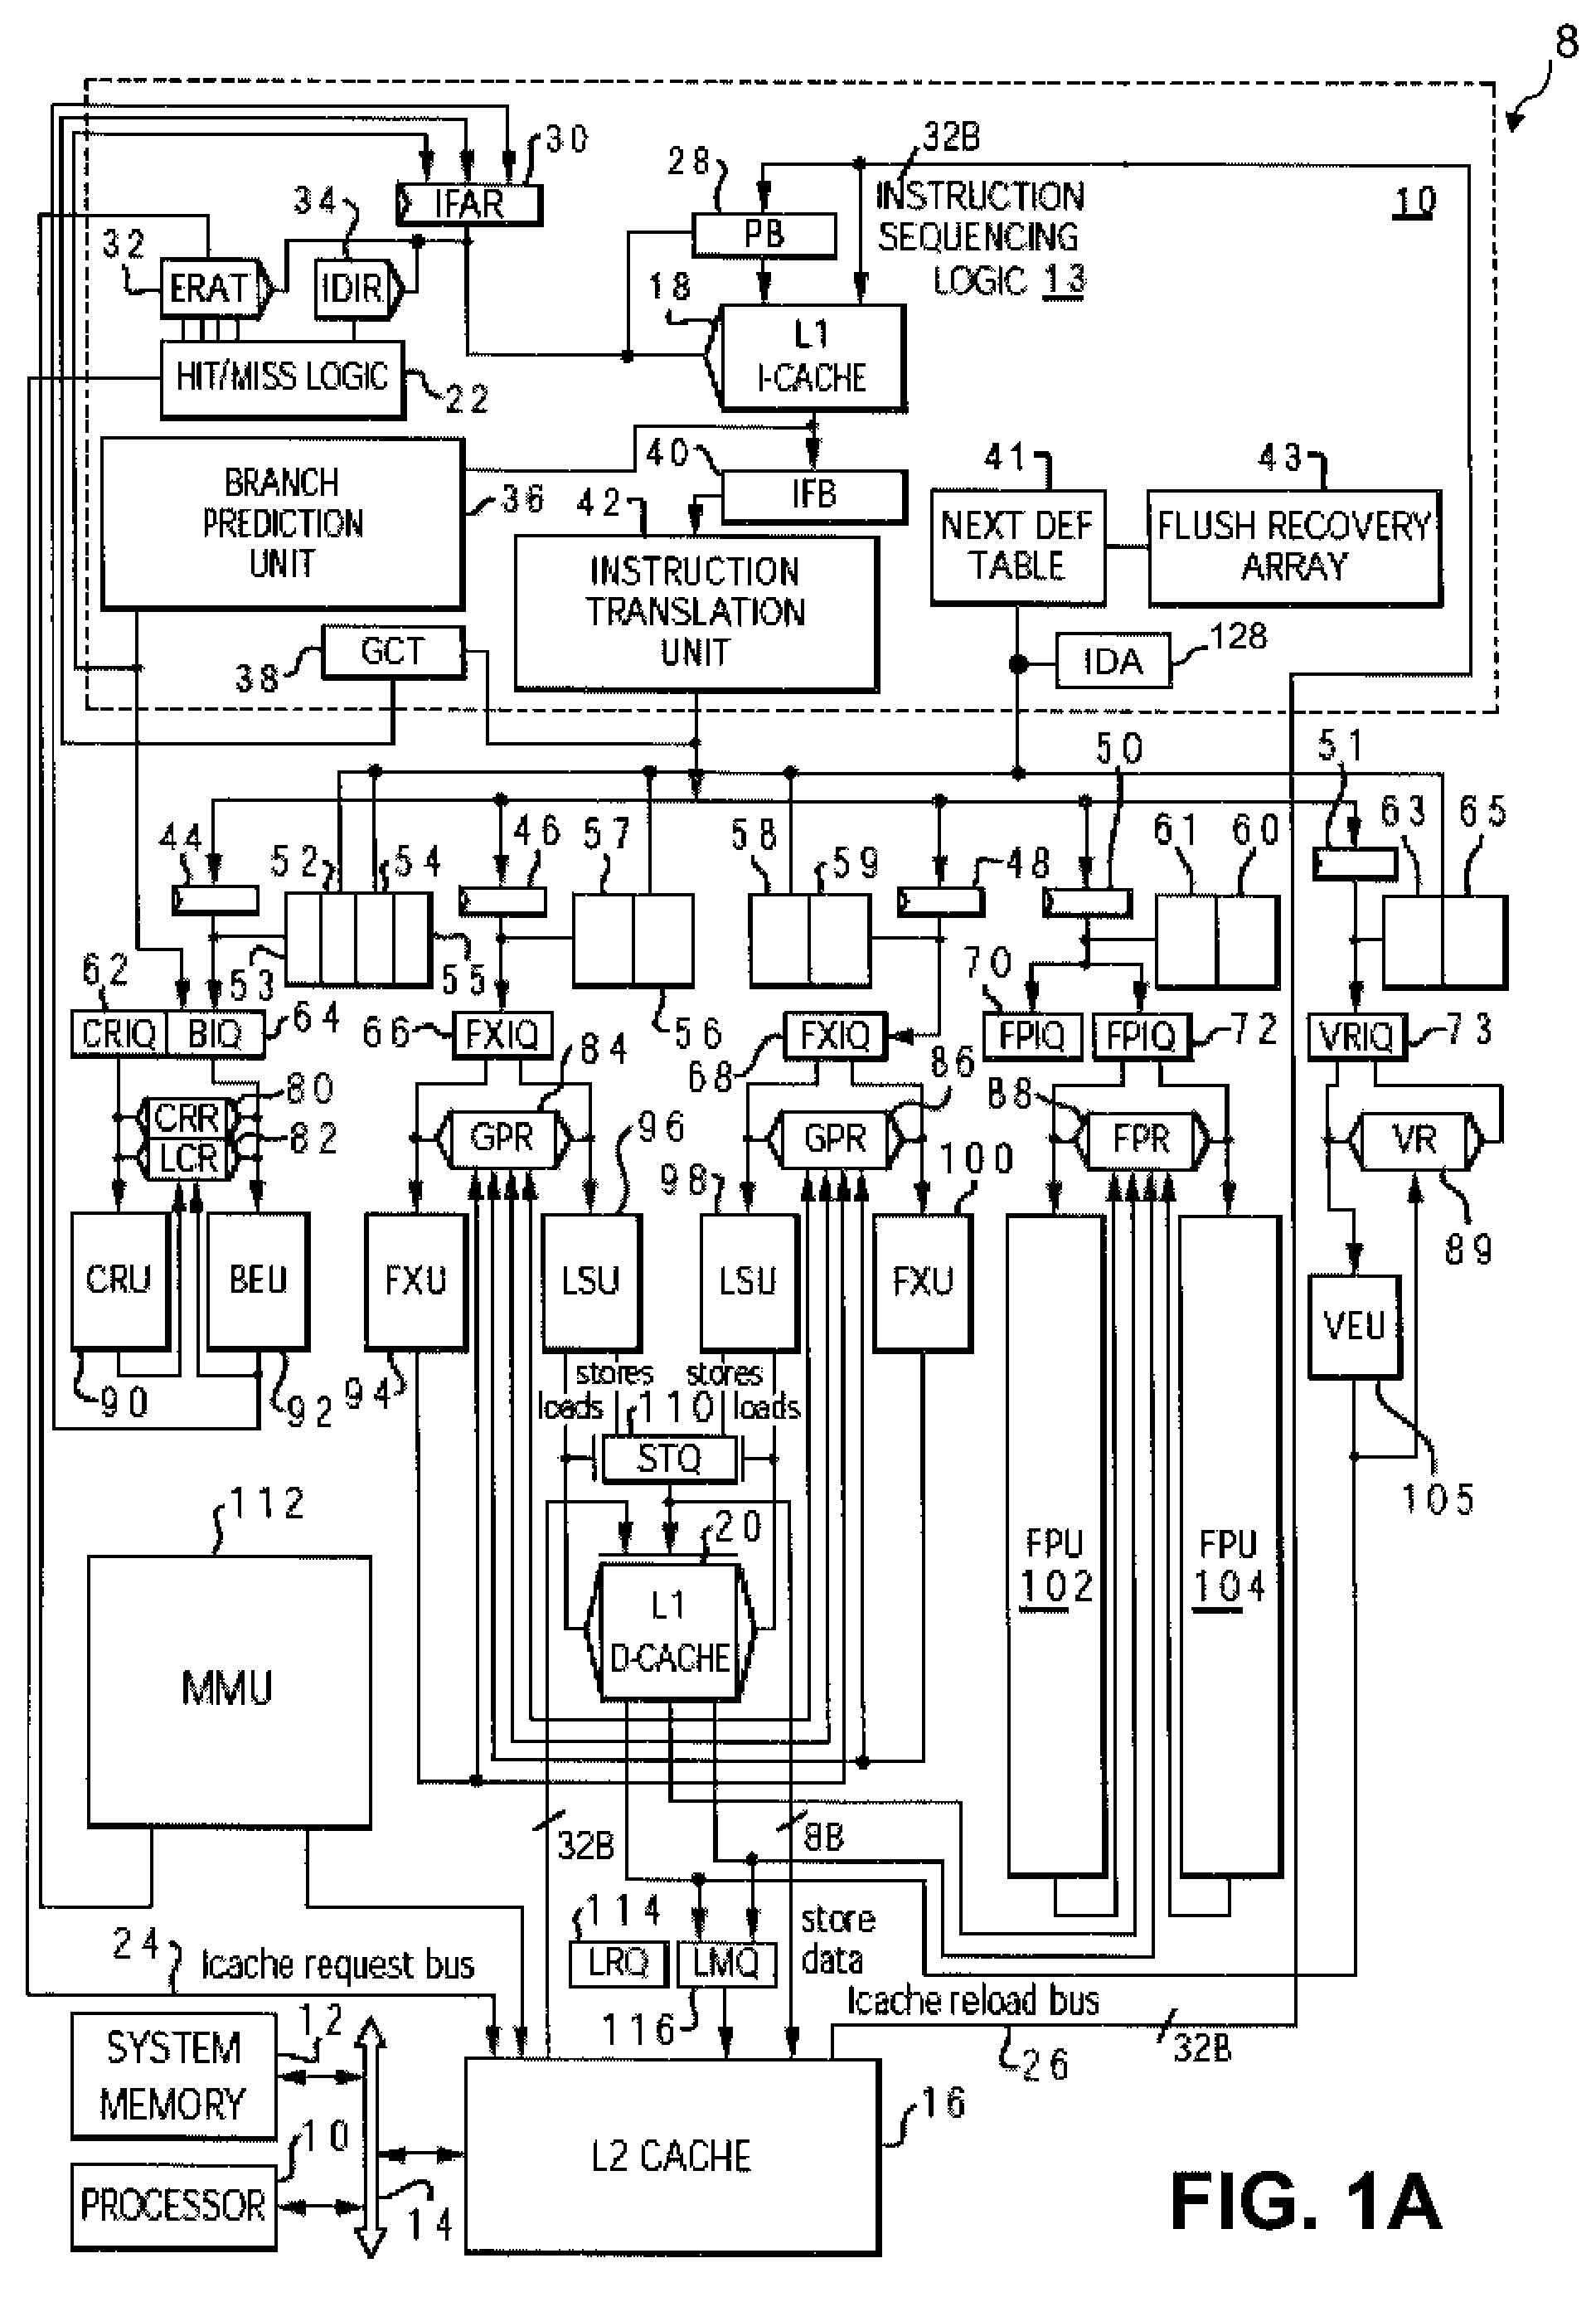 Method and system for tracking instruction dependency in an out-of-order processor